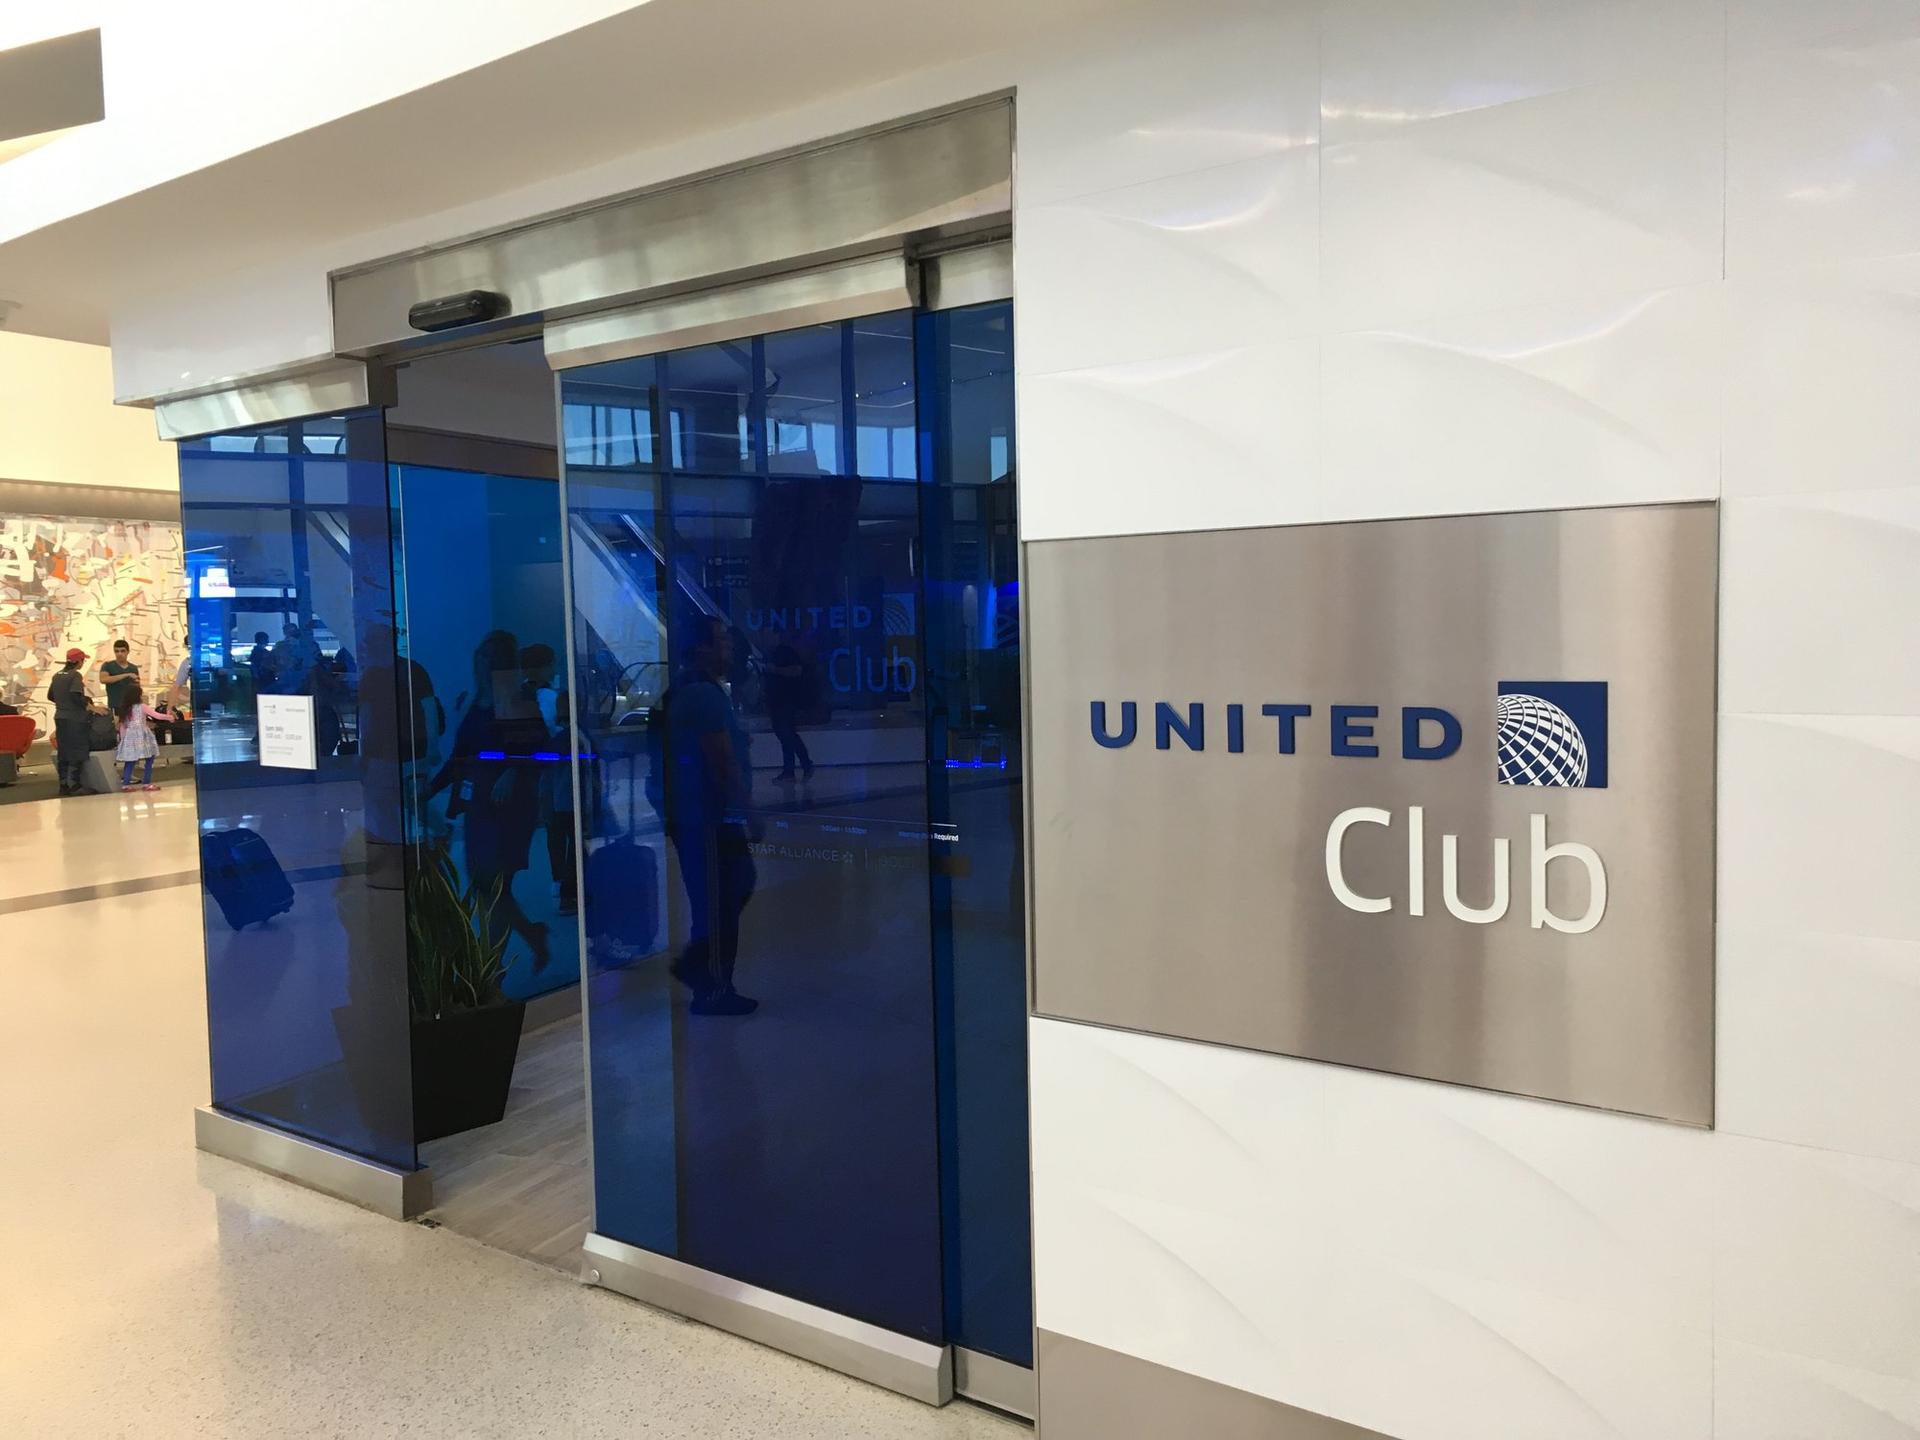 United Airlines United Club image 21 of 43